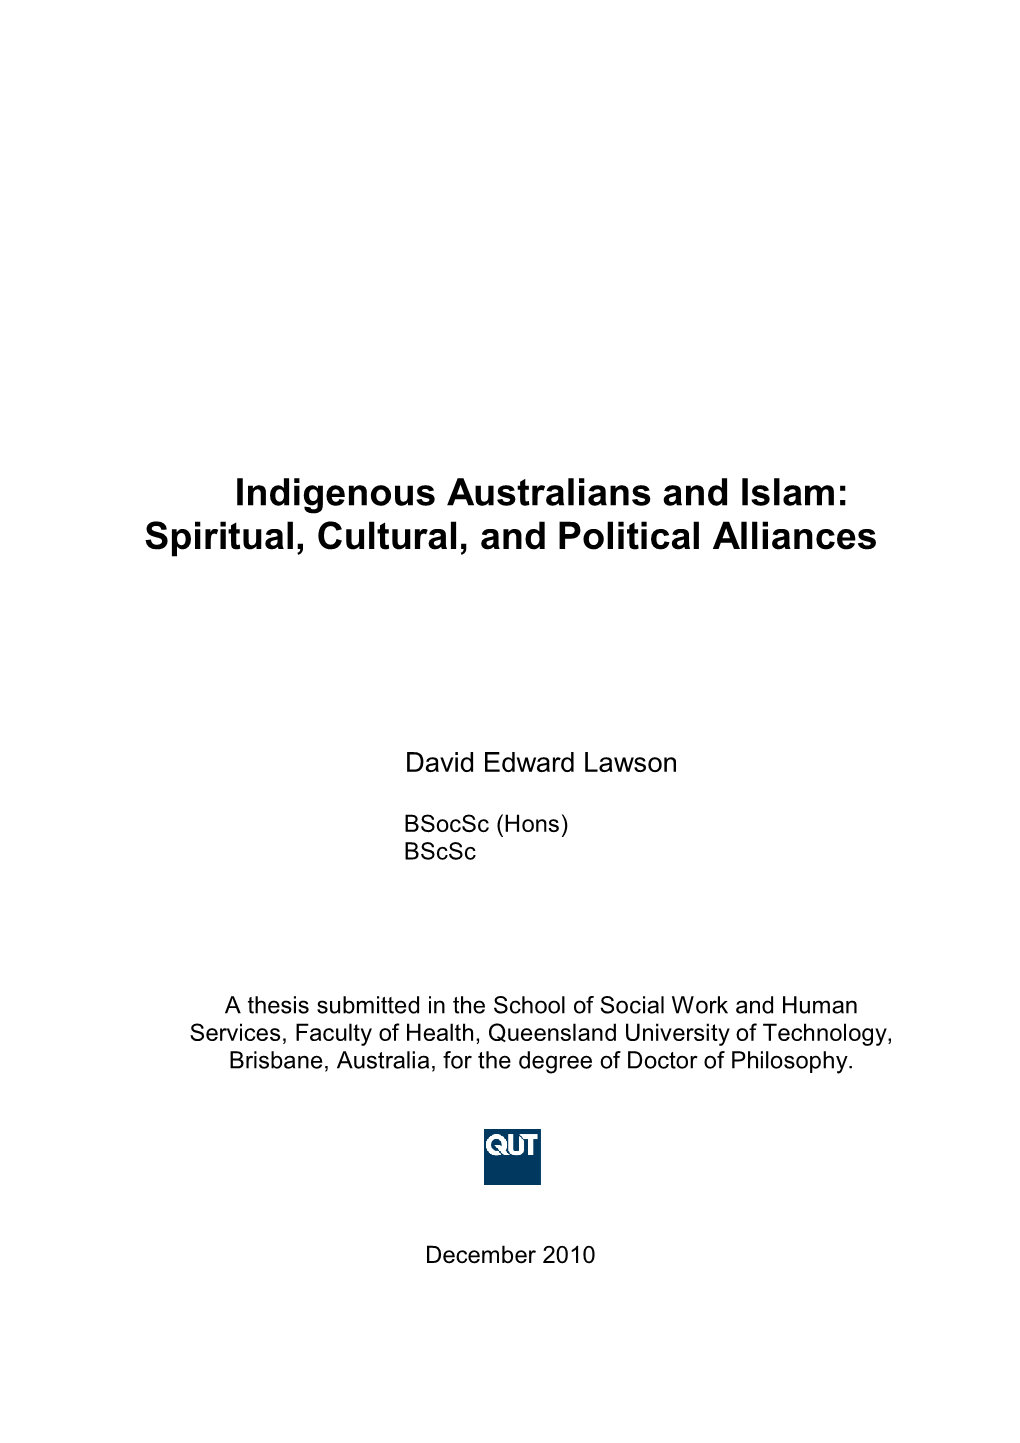 Indigenous Australians and Islam: Spiritual, Cultural, and Political Alliances